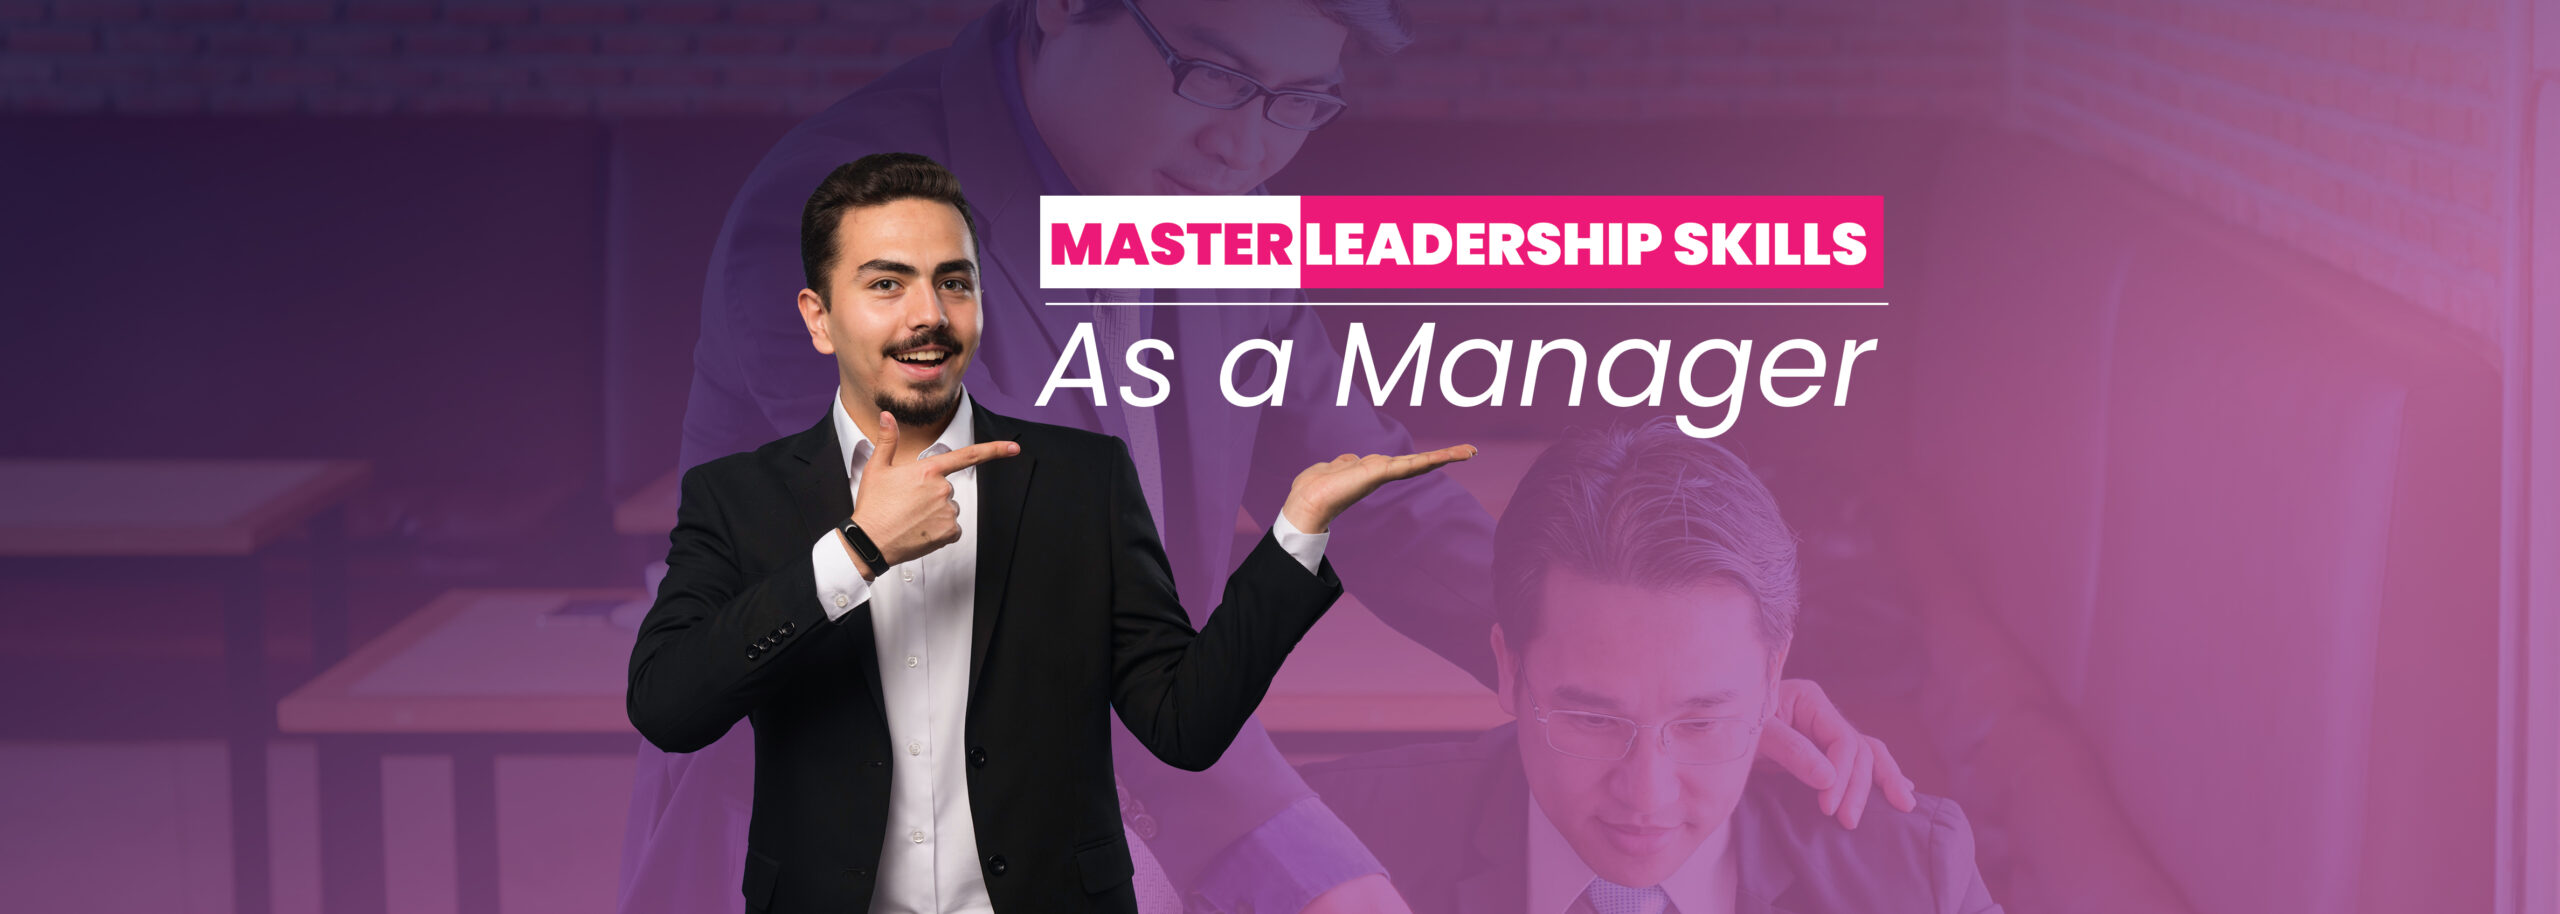 5 Ways to Master Leadership Skills as a Manager | DT Evolve